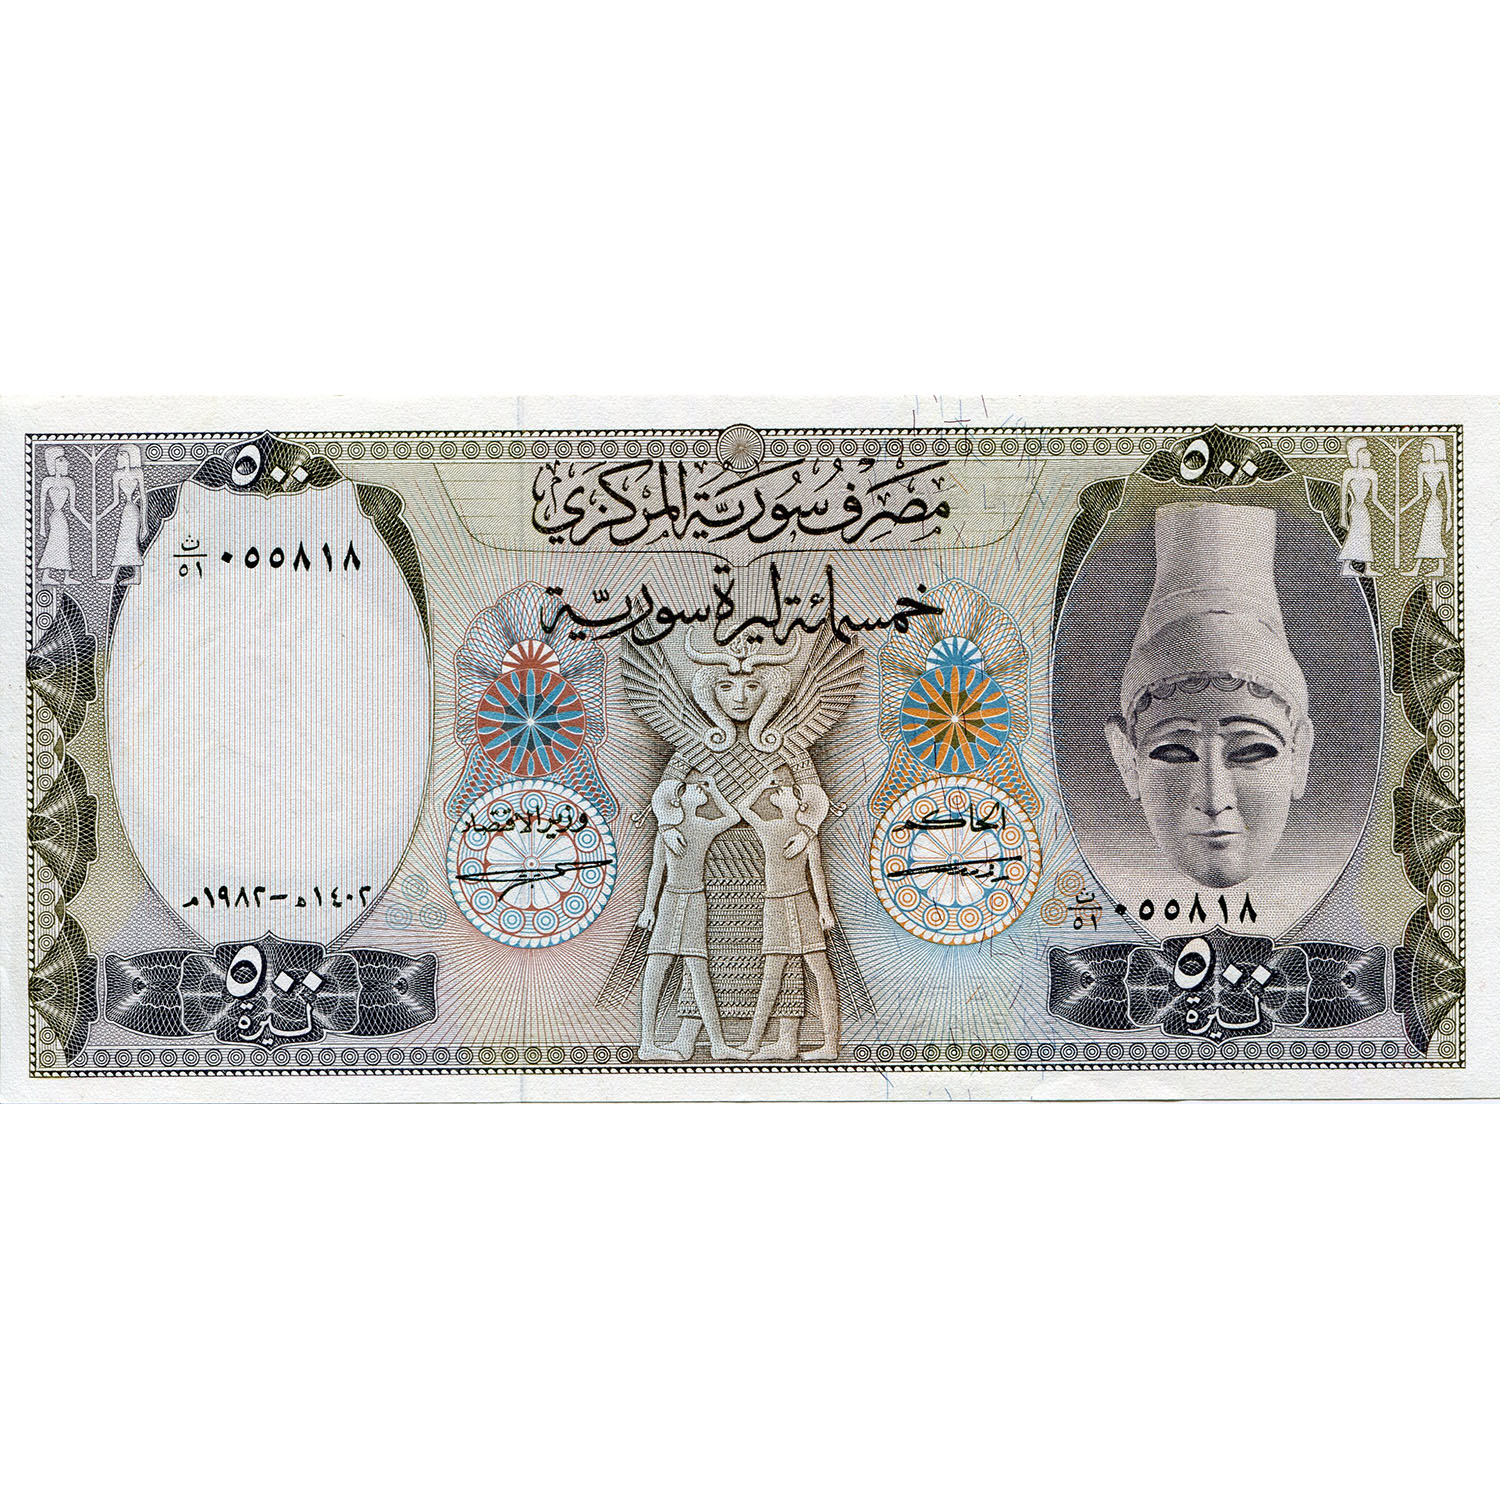 Currency From Middle East